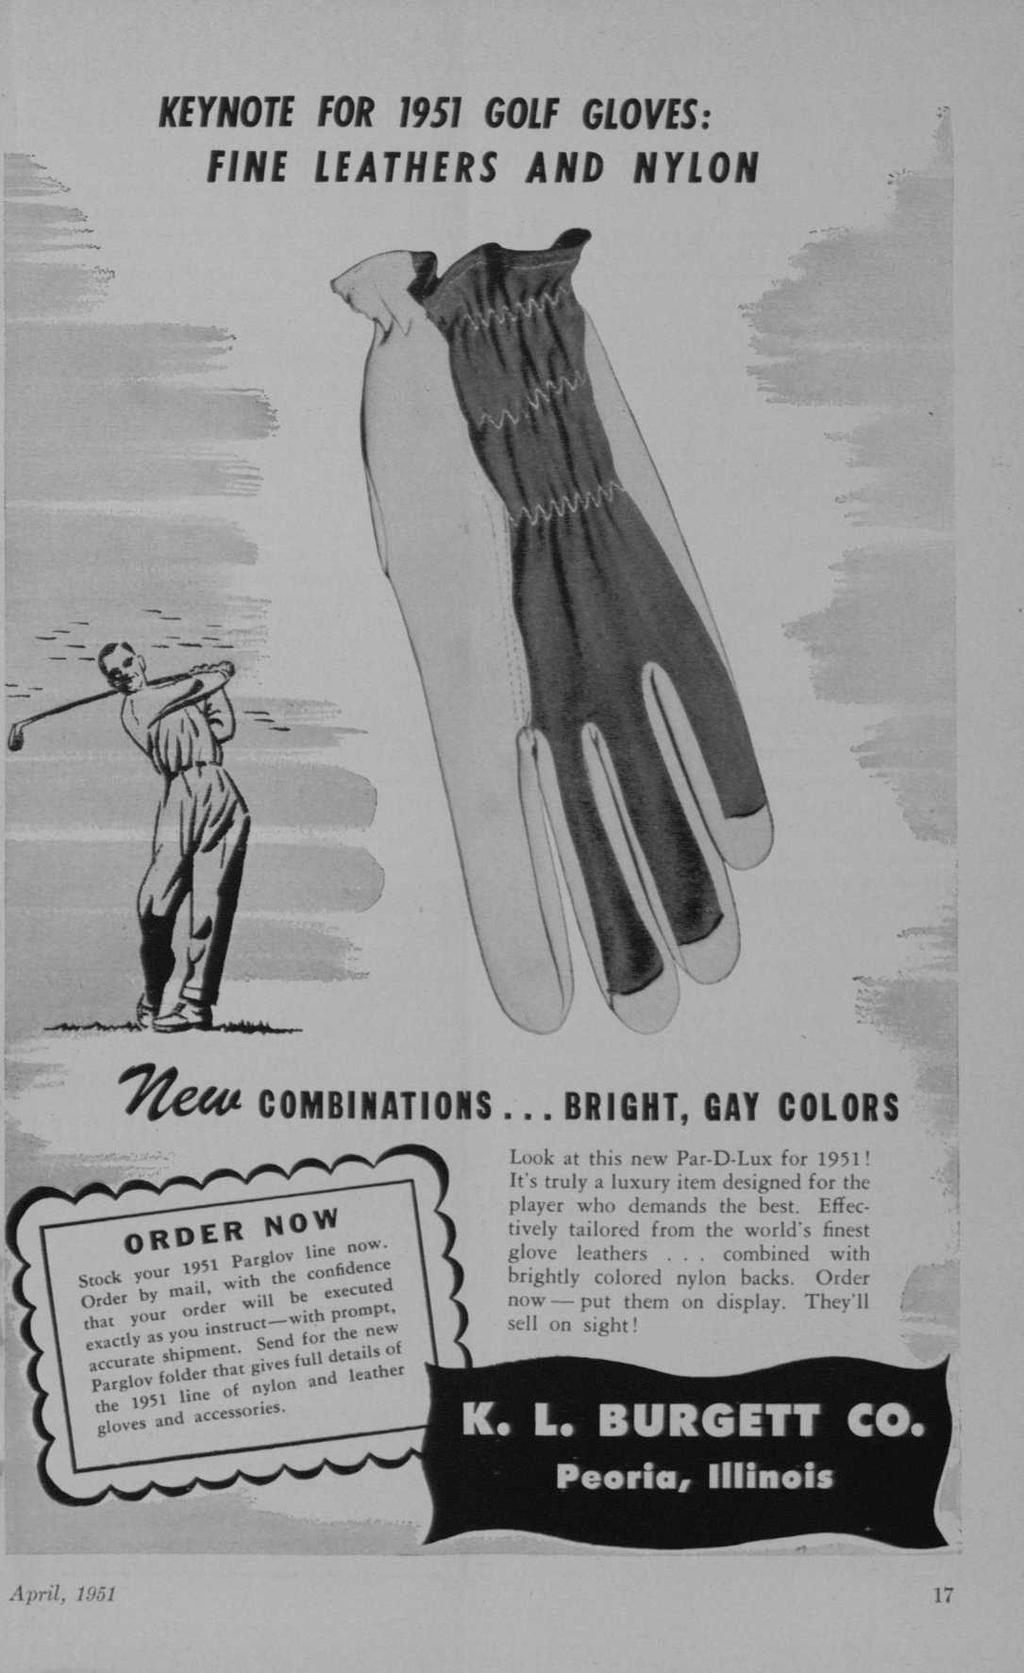 KEYNOTE FOR 1951 GOLF GLOVES: FINE LEATHERS AND NYLON COMBINATIONS... BRIGHT, GAY COLORS Look at this new Par-D-Lux for 1951! It's truly a luxury item designed for the player who demands the best.